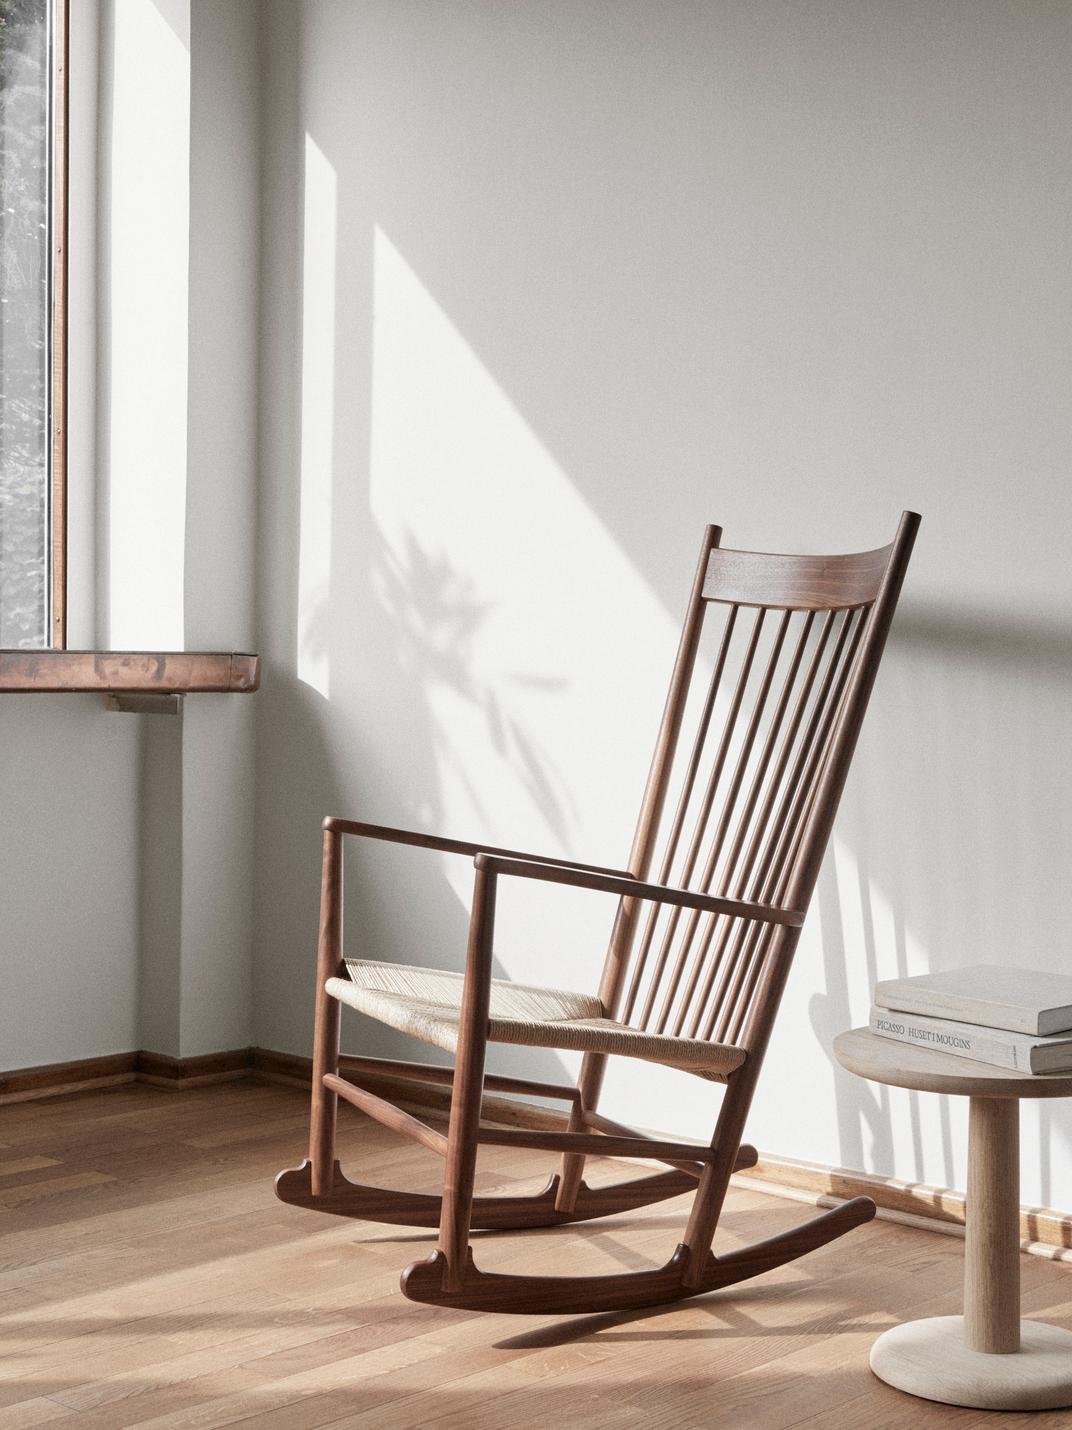 Hans J. Wegner showed an early interest in the rocking chair as a design object, and J16 was one of his first chairs ever put into production. The very first version was designed in 1944. After a process to make the chair easier to manufacture, the